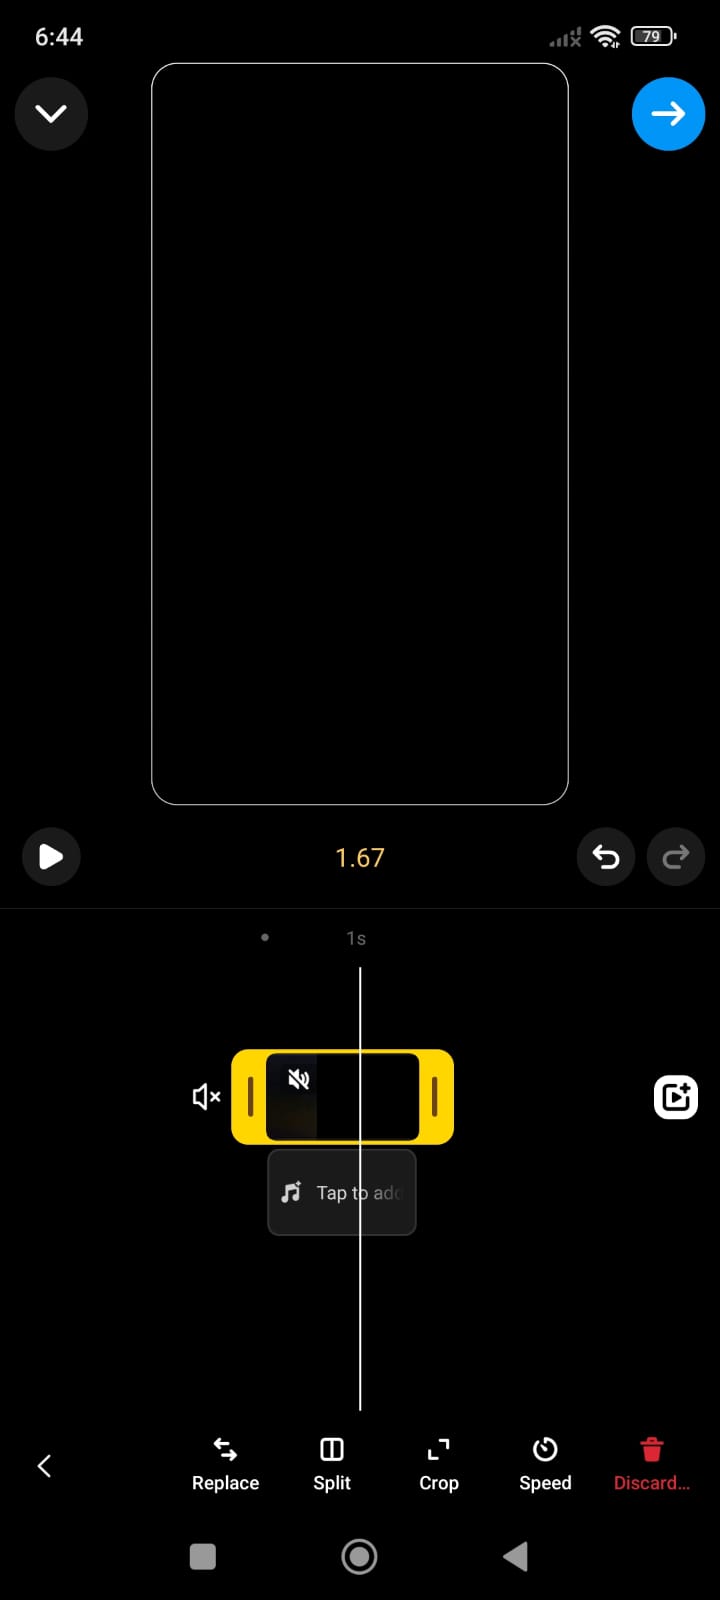 Click on your clip in the editing timeline, then push and drag the yellow slider to change the duration of the video.